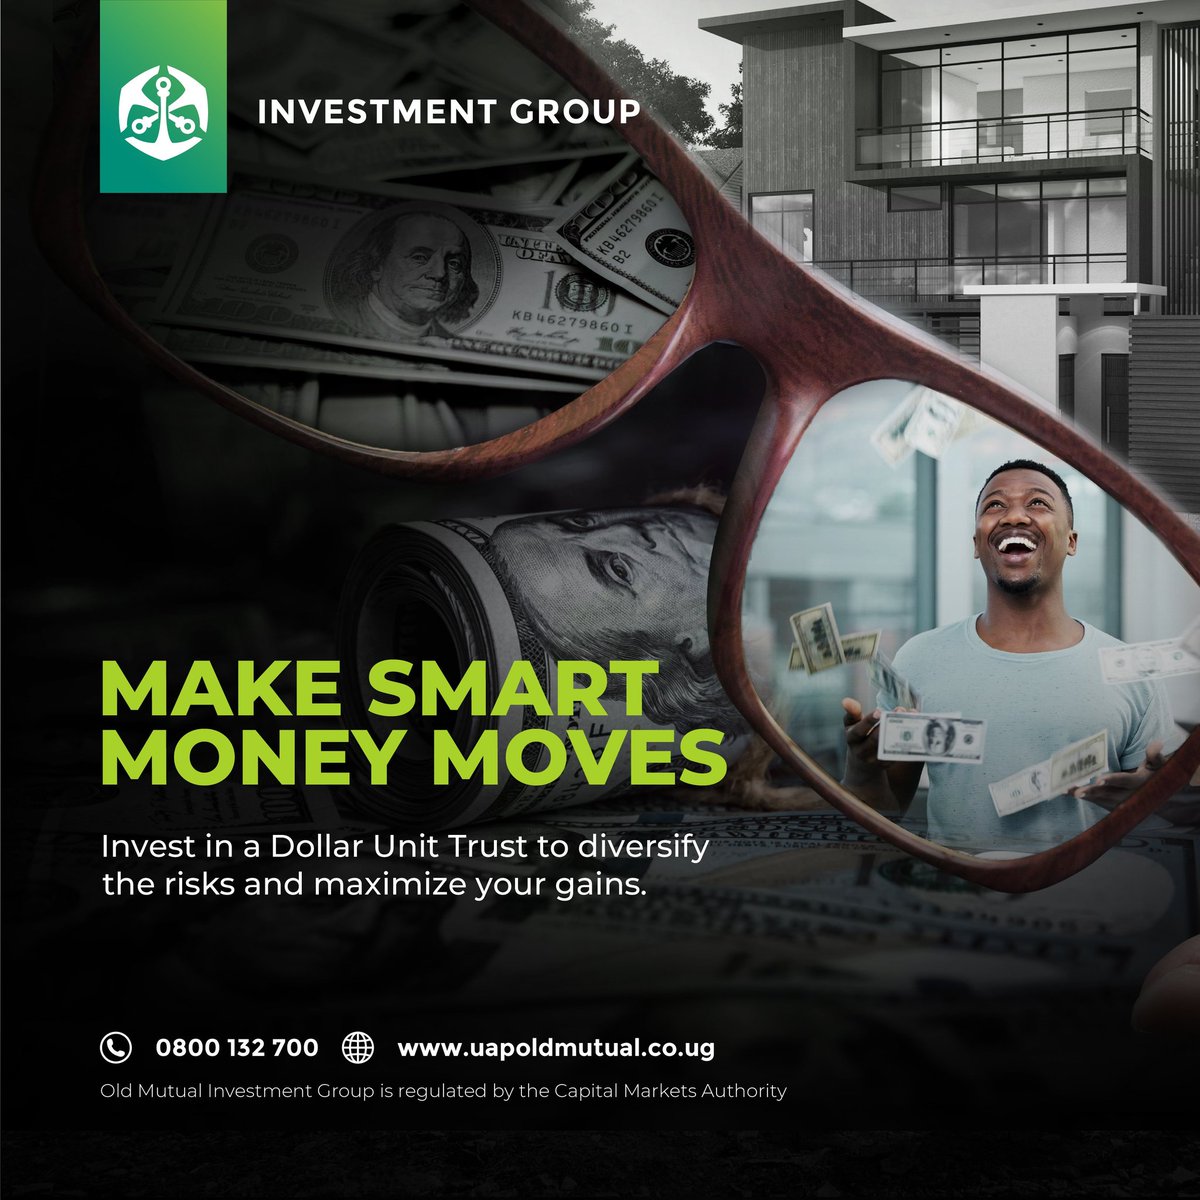 Monday is here and it's a good opportunity to make wise financial decisions. Explore the seamless benefits of investing in @UAPOldMutualUg's #DollarUnitTrust Fund and grow your wealth. Checkout here: uapoldmutual.co.ug/personal/save-… to get started.
#TutambuleFfena